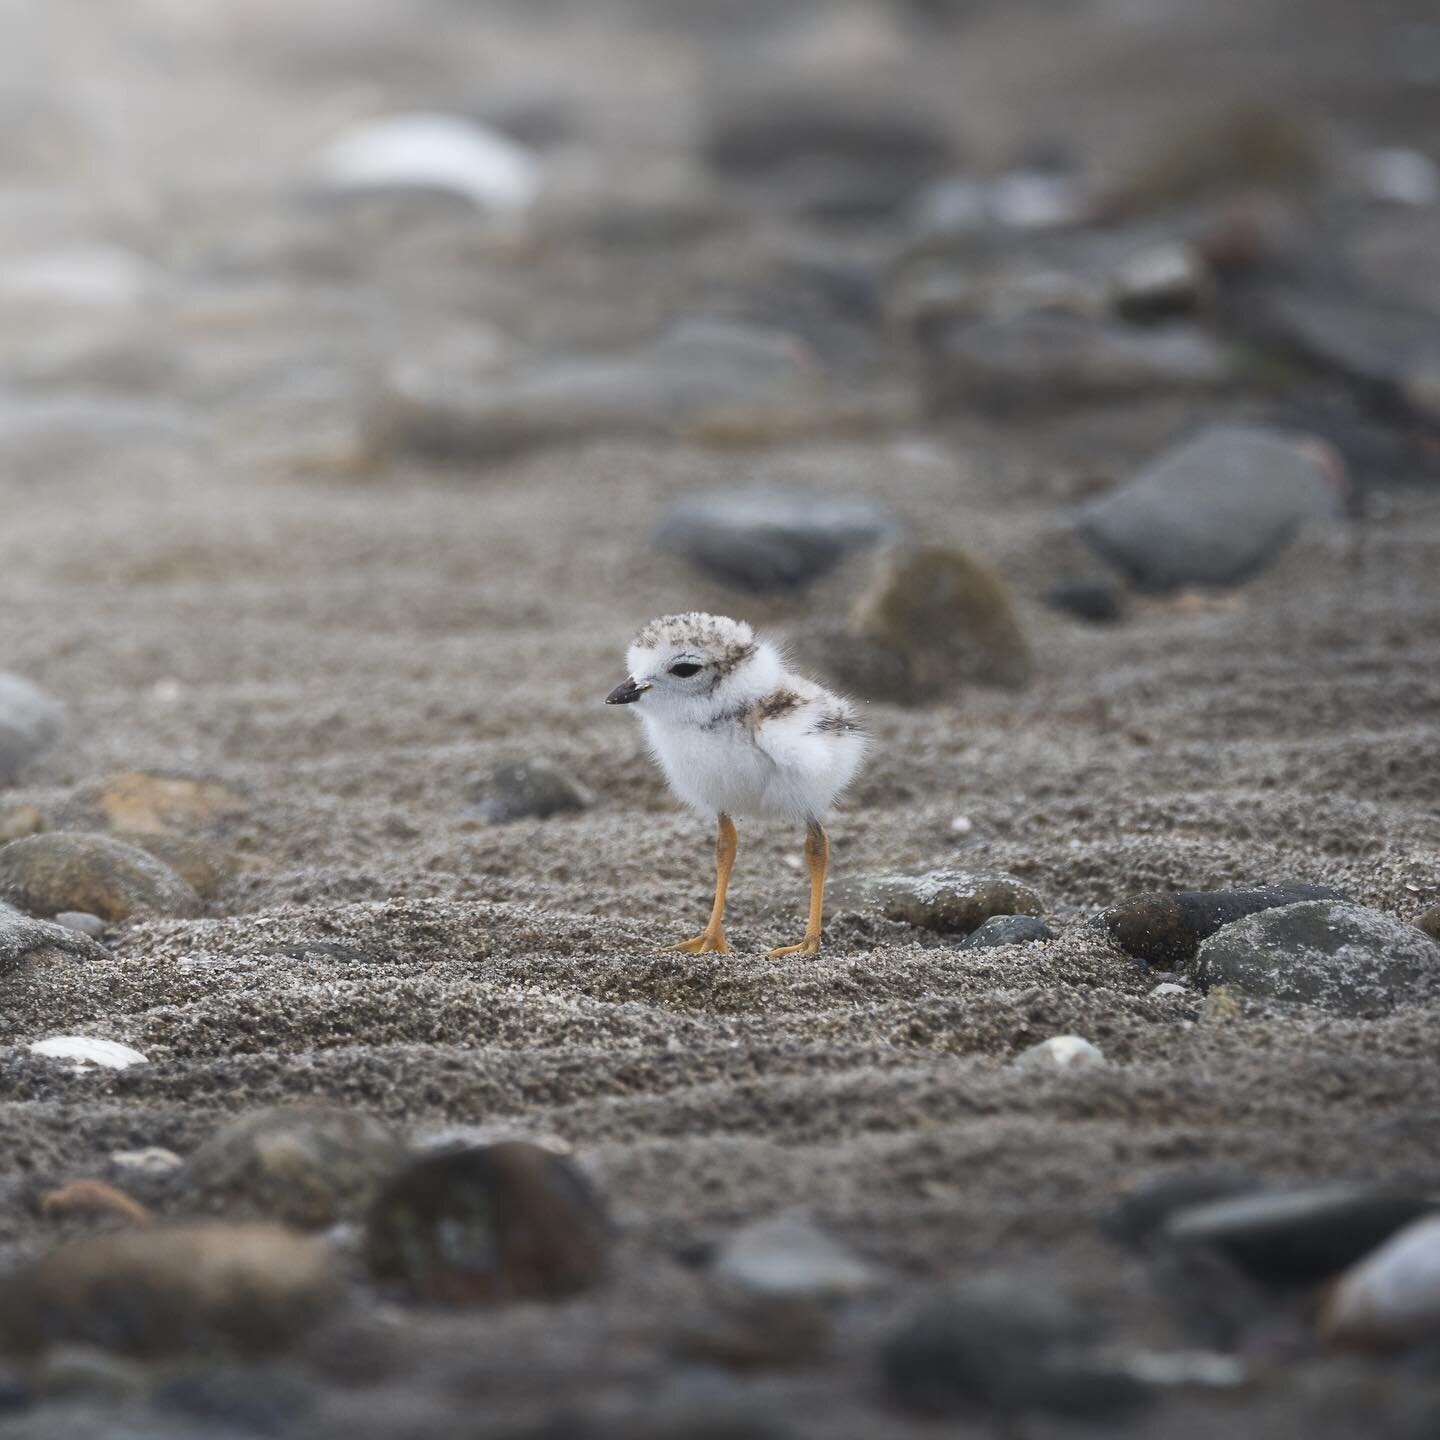 Thinking of turning this into a plover chick feature page. 

Seriously the most fun I&rsquo;ve had photographing in a while.